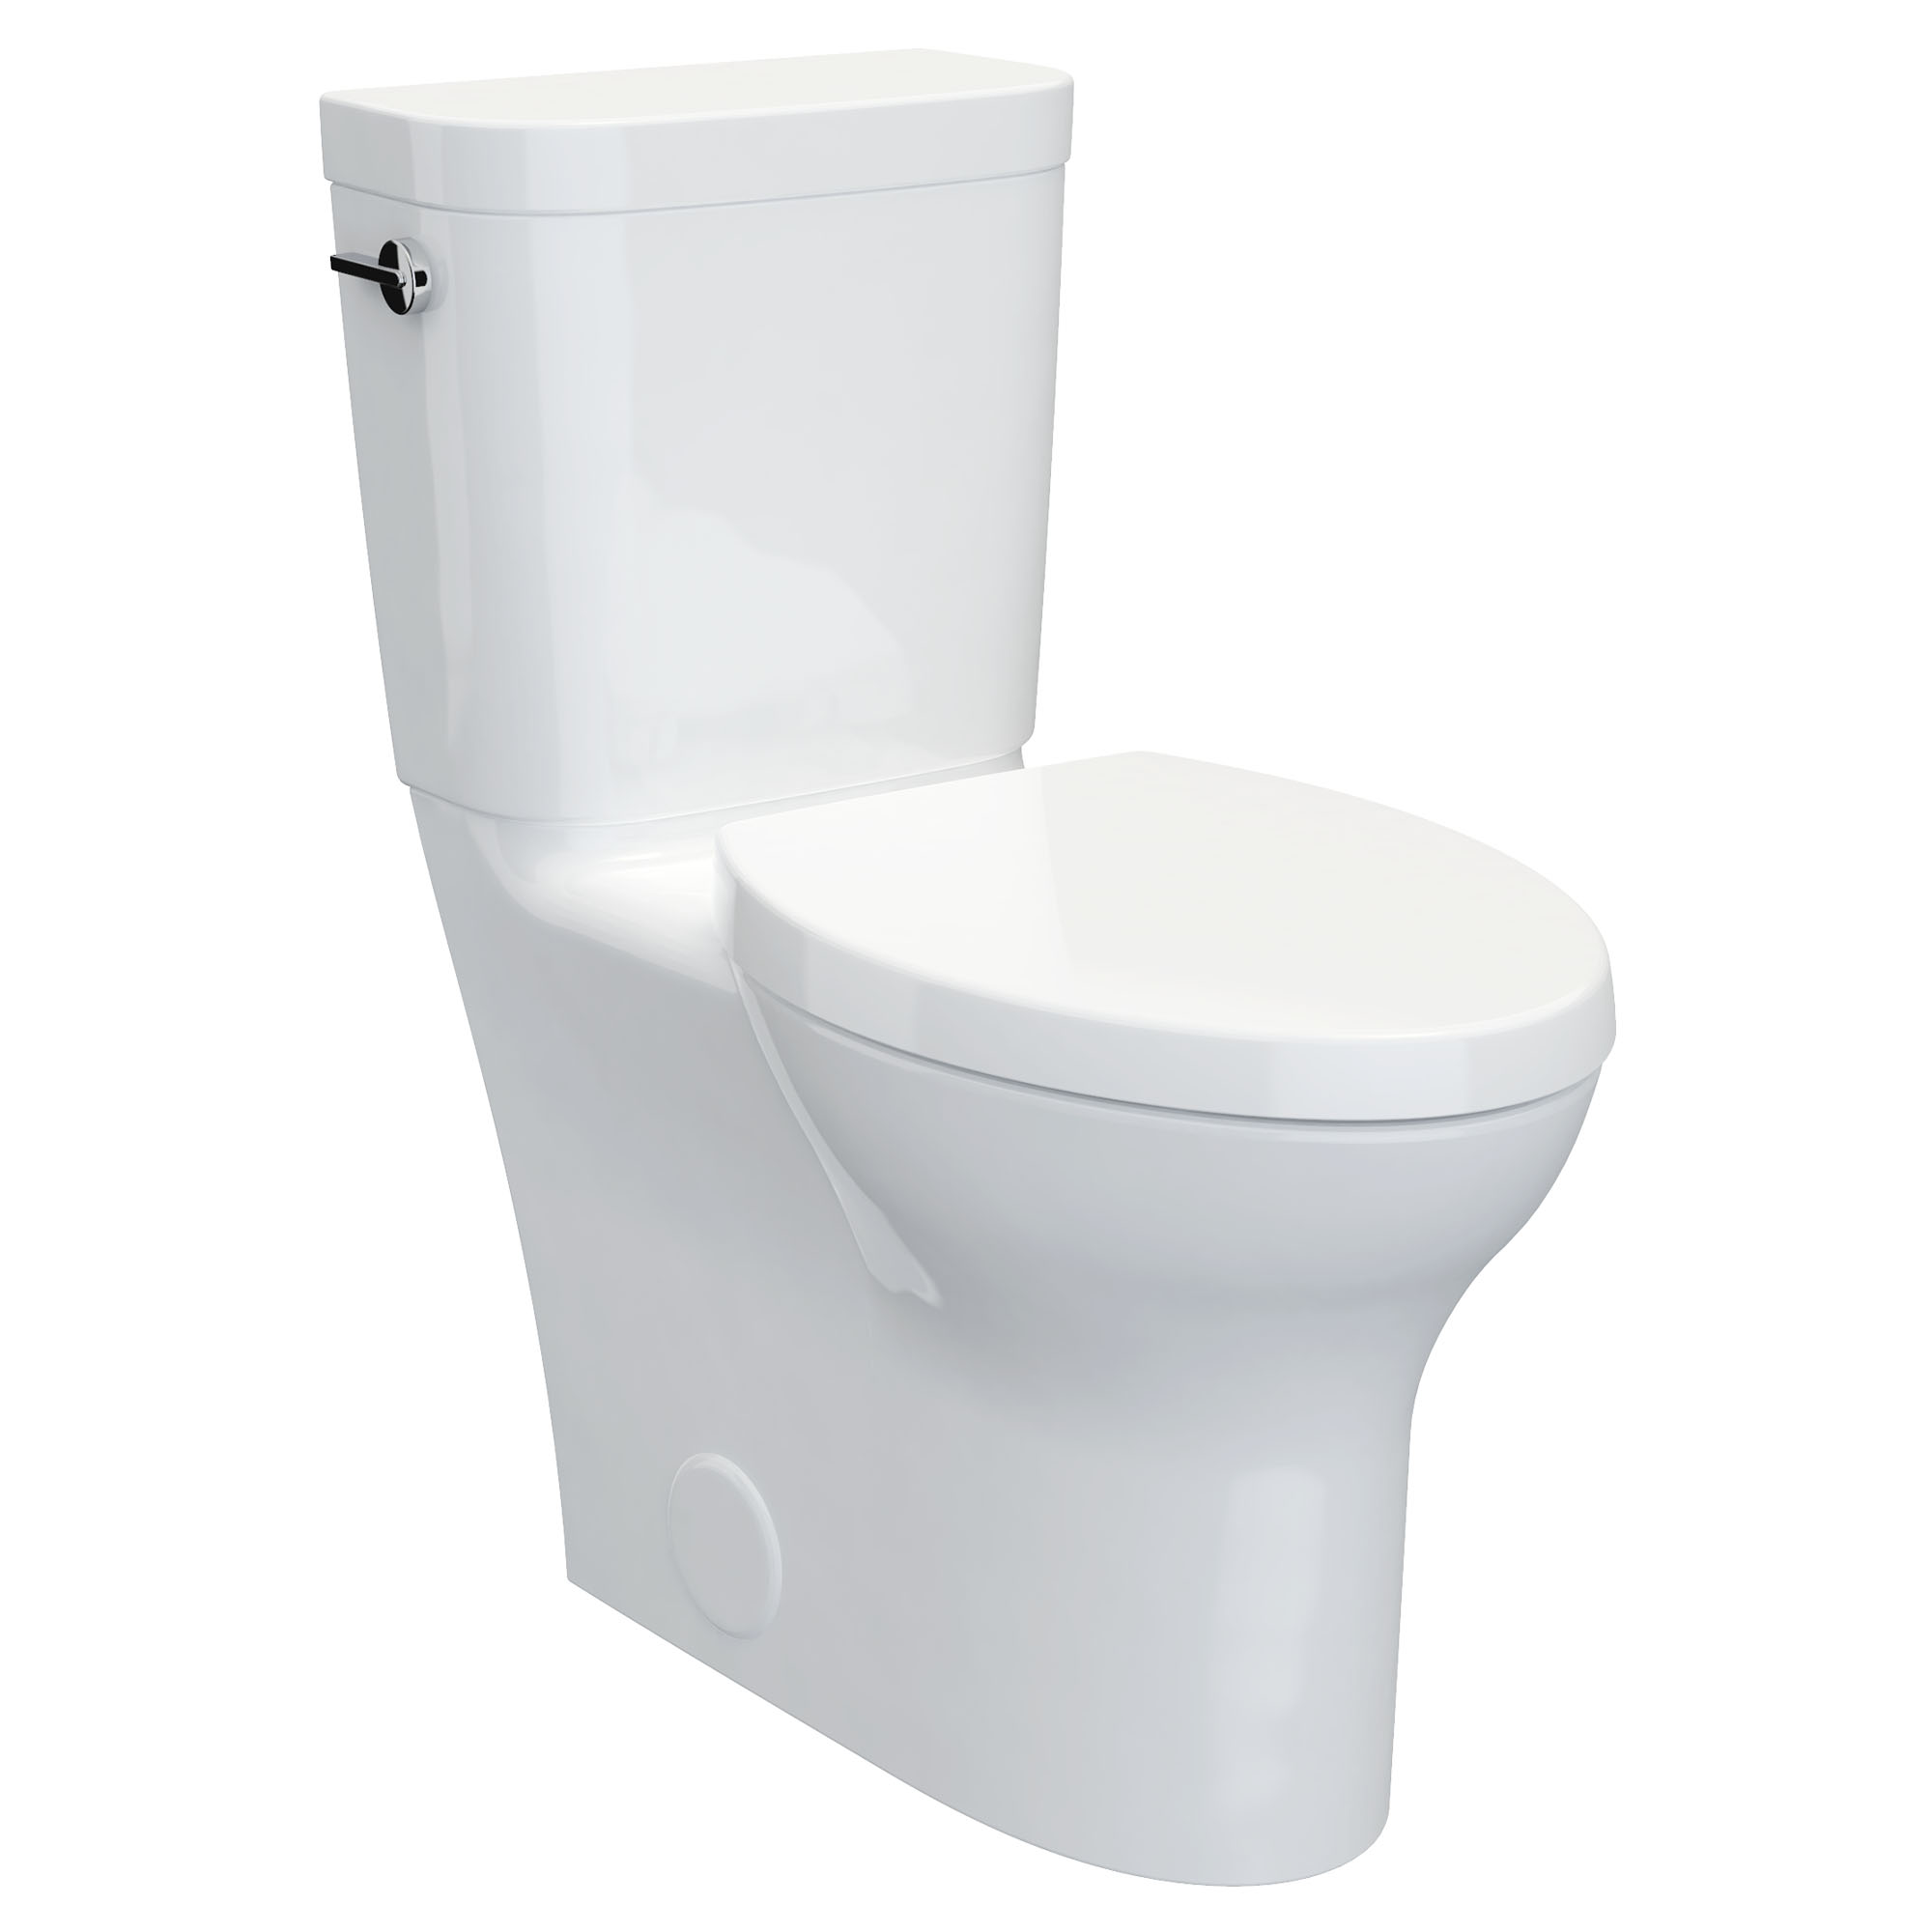 Equility® Two-Piece Chair-Height Left-Hand Trip Lever Elongated Toilet with Seat